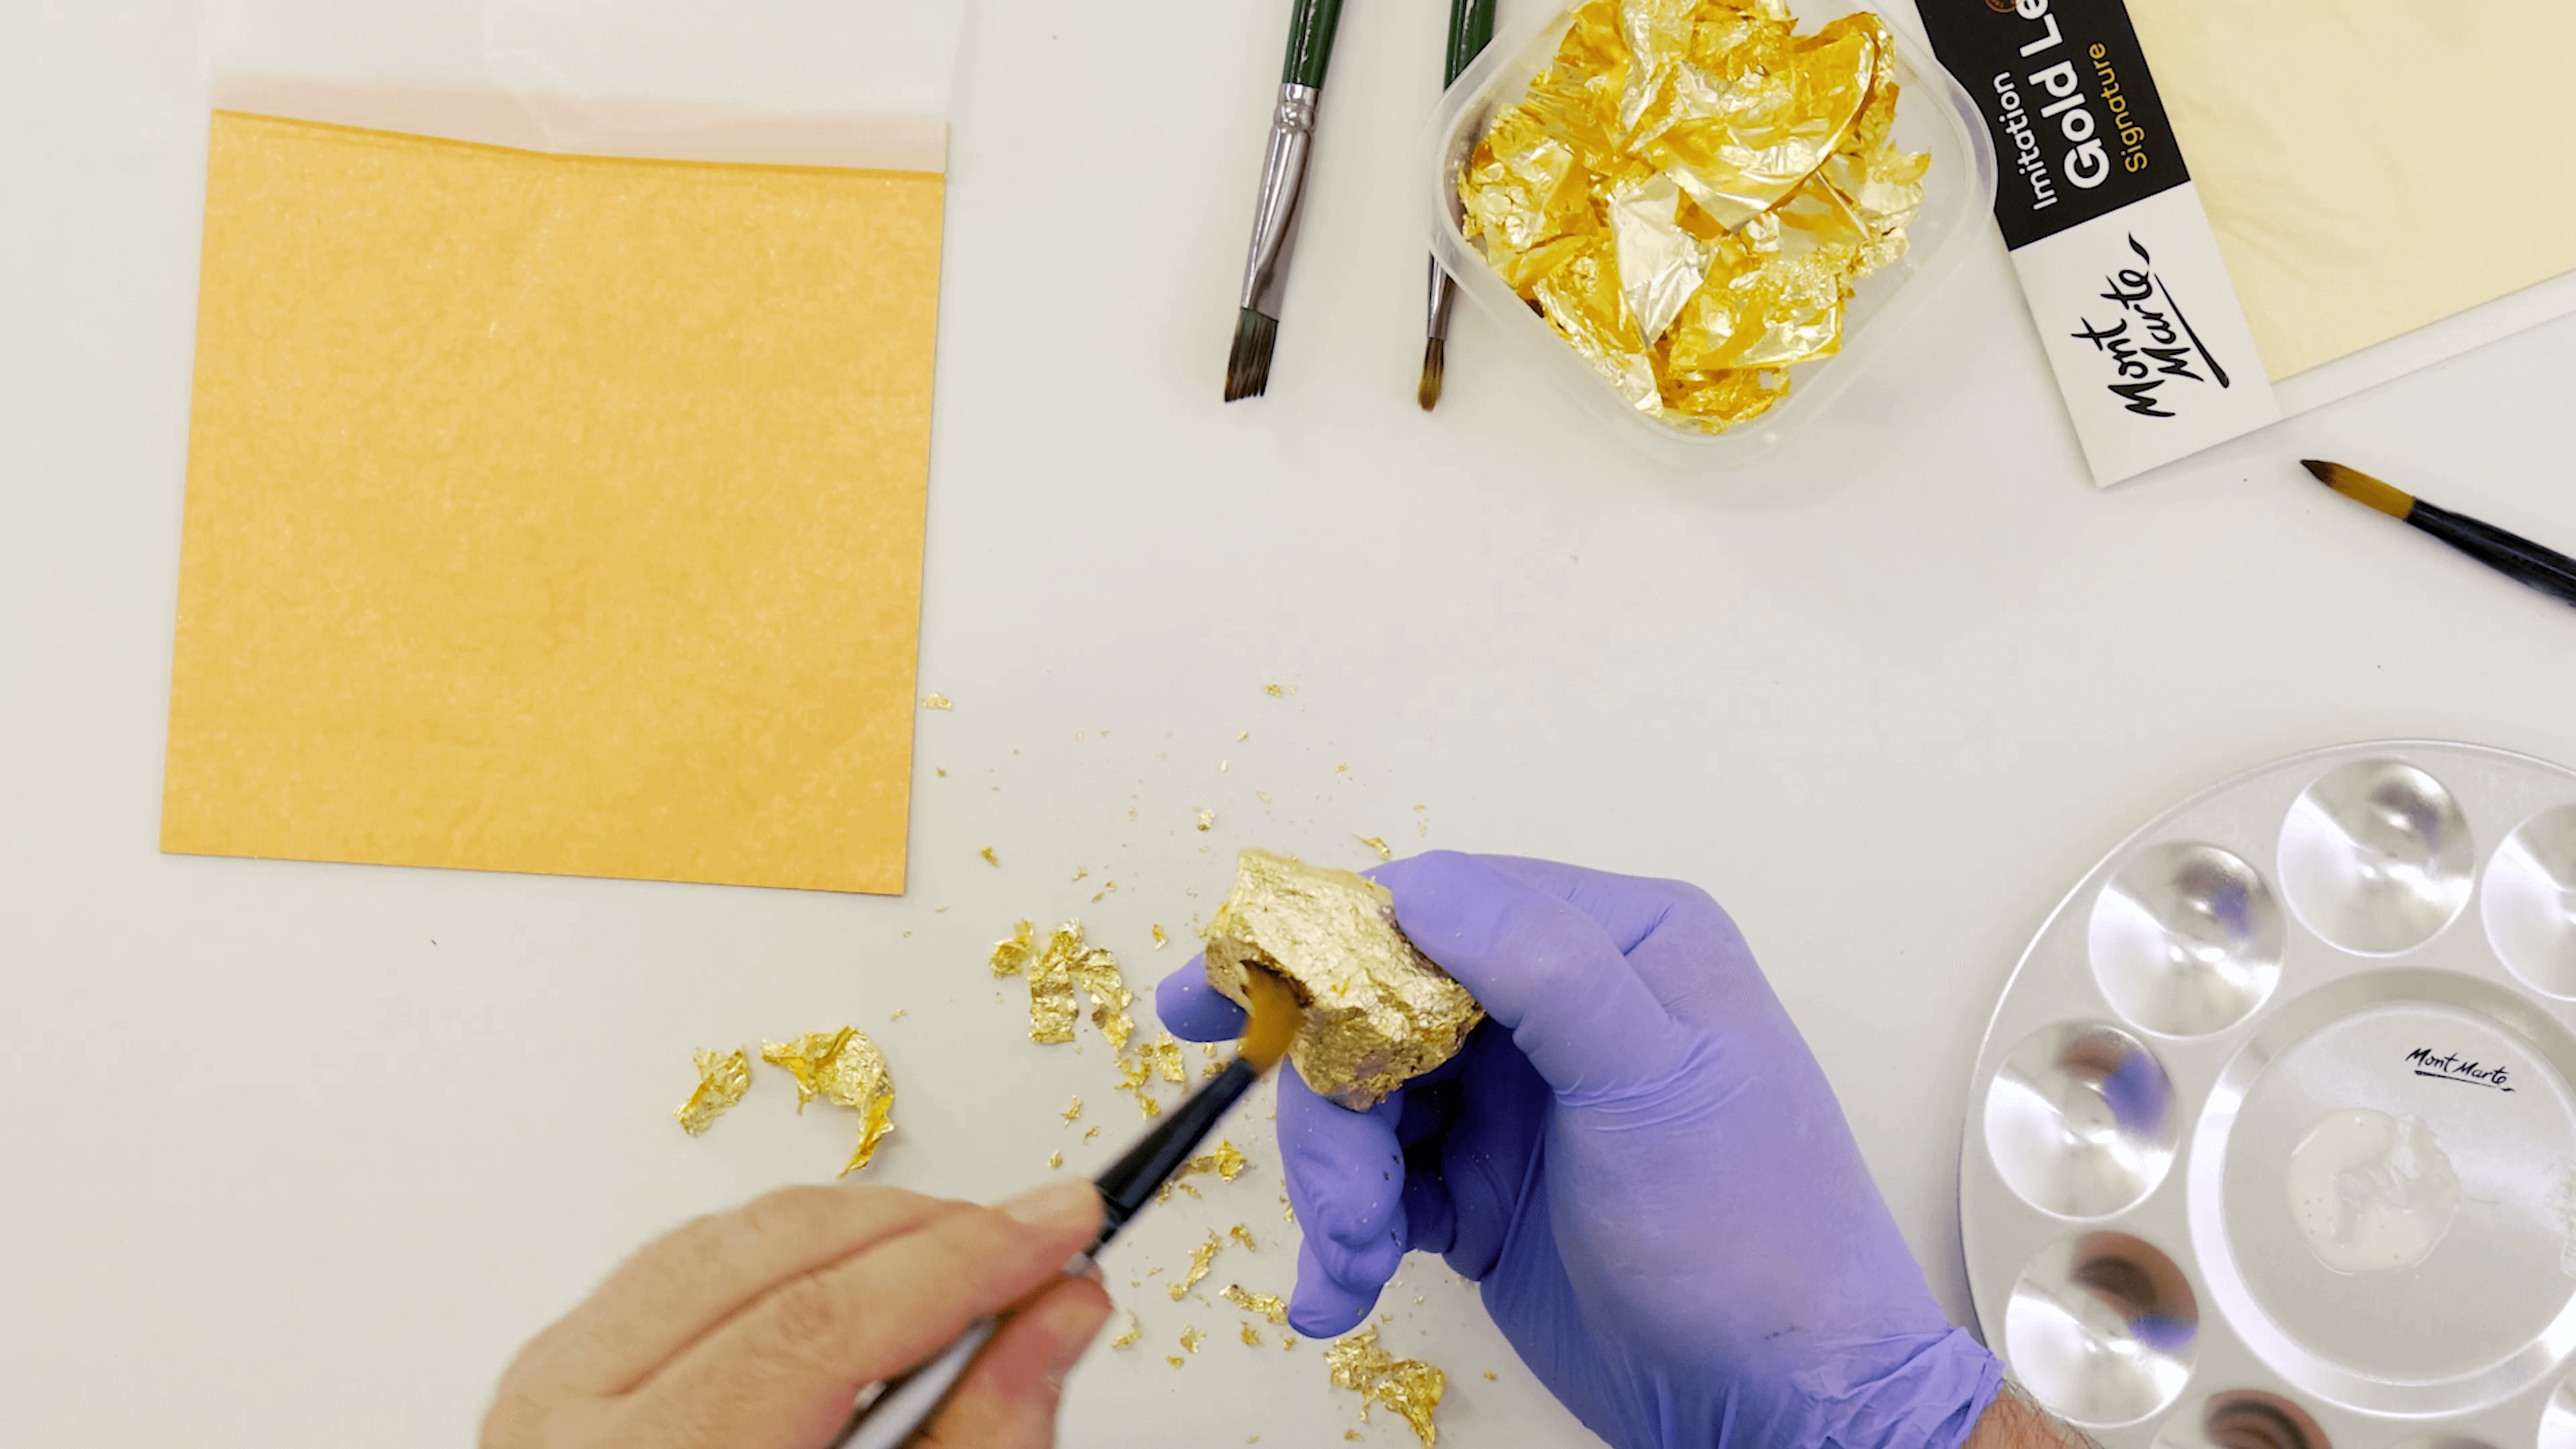 Person brushing gold leaf on a rock wearing a purple glove, in a busy workspace.